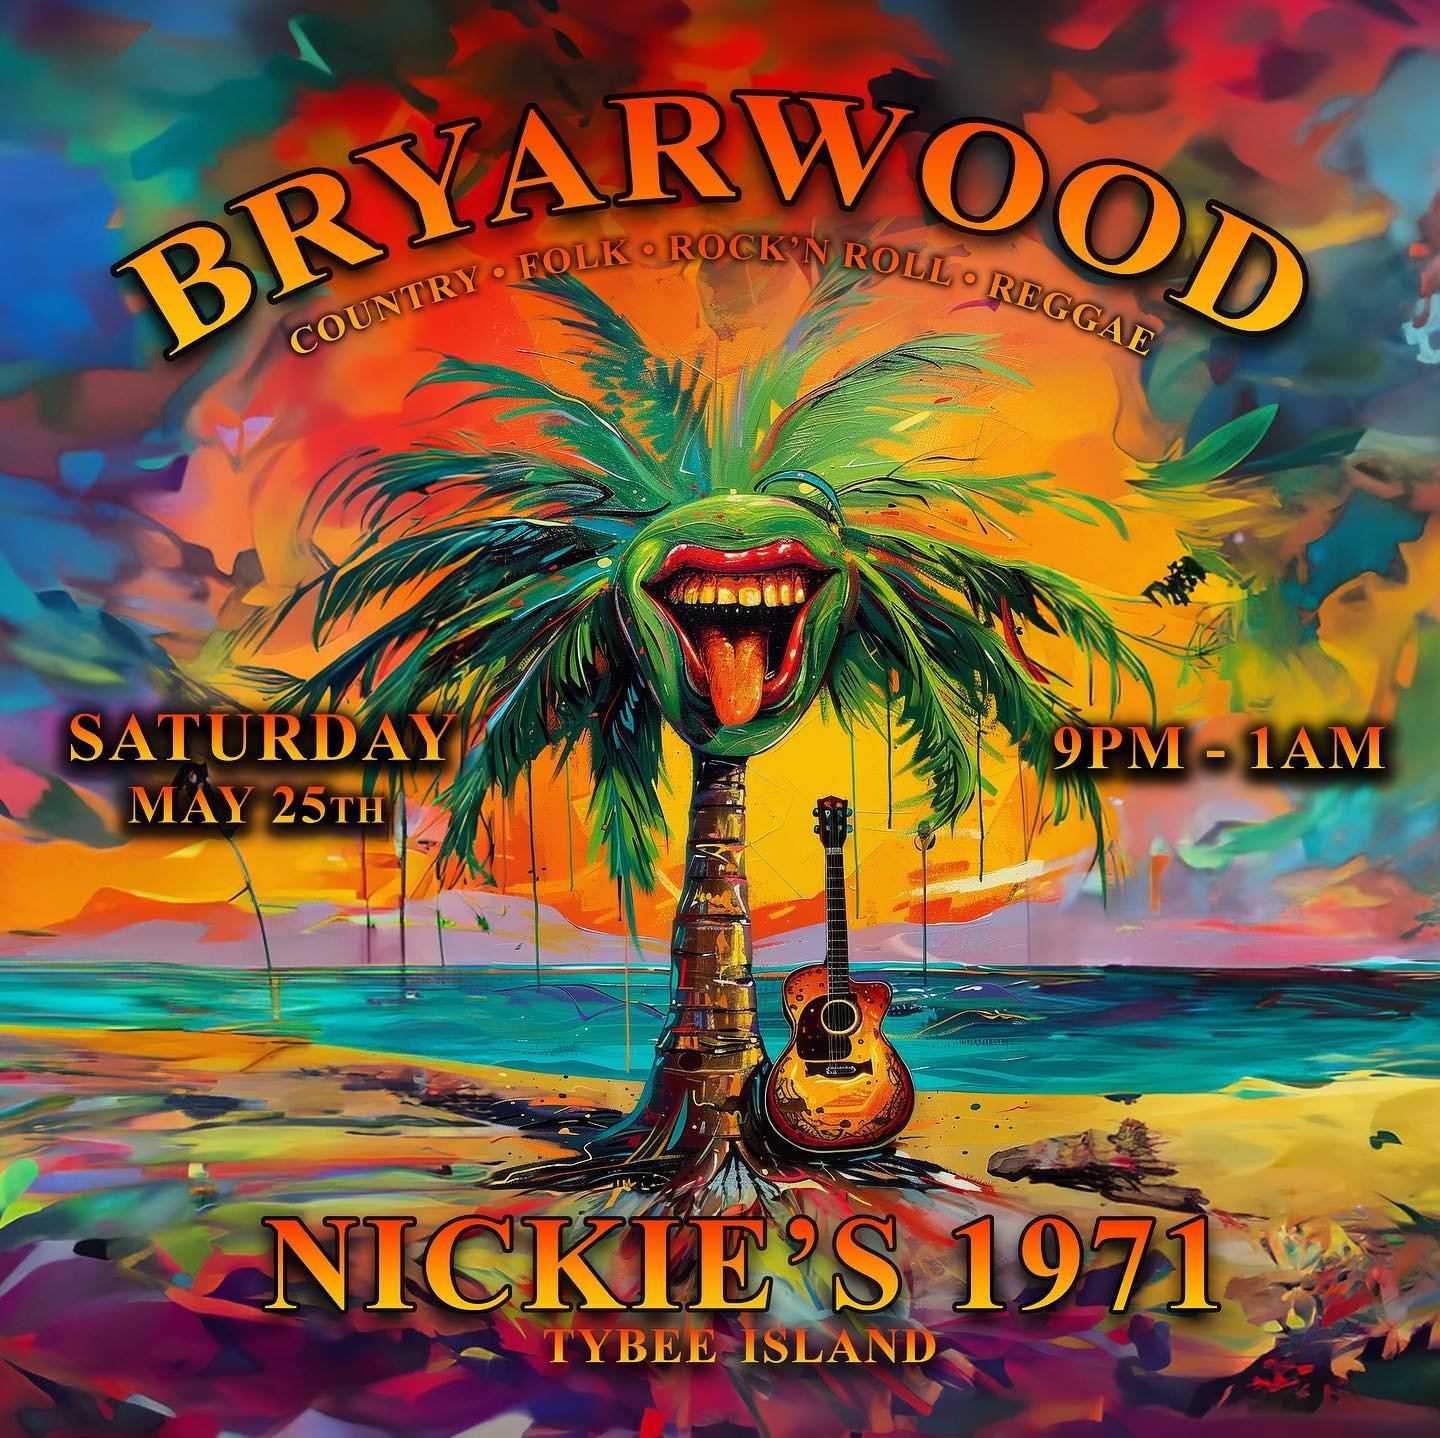 Saturday night party with Bryarwood at Nickie&rsquo;s on #tybeeisland #livemusic